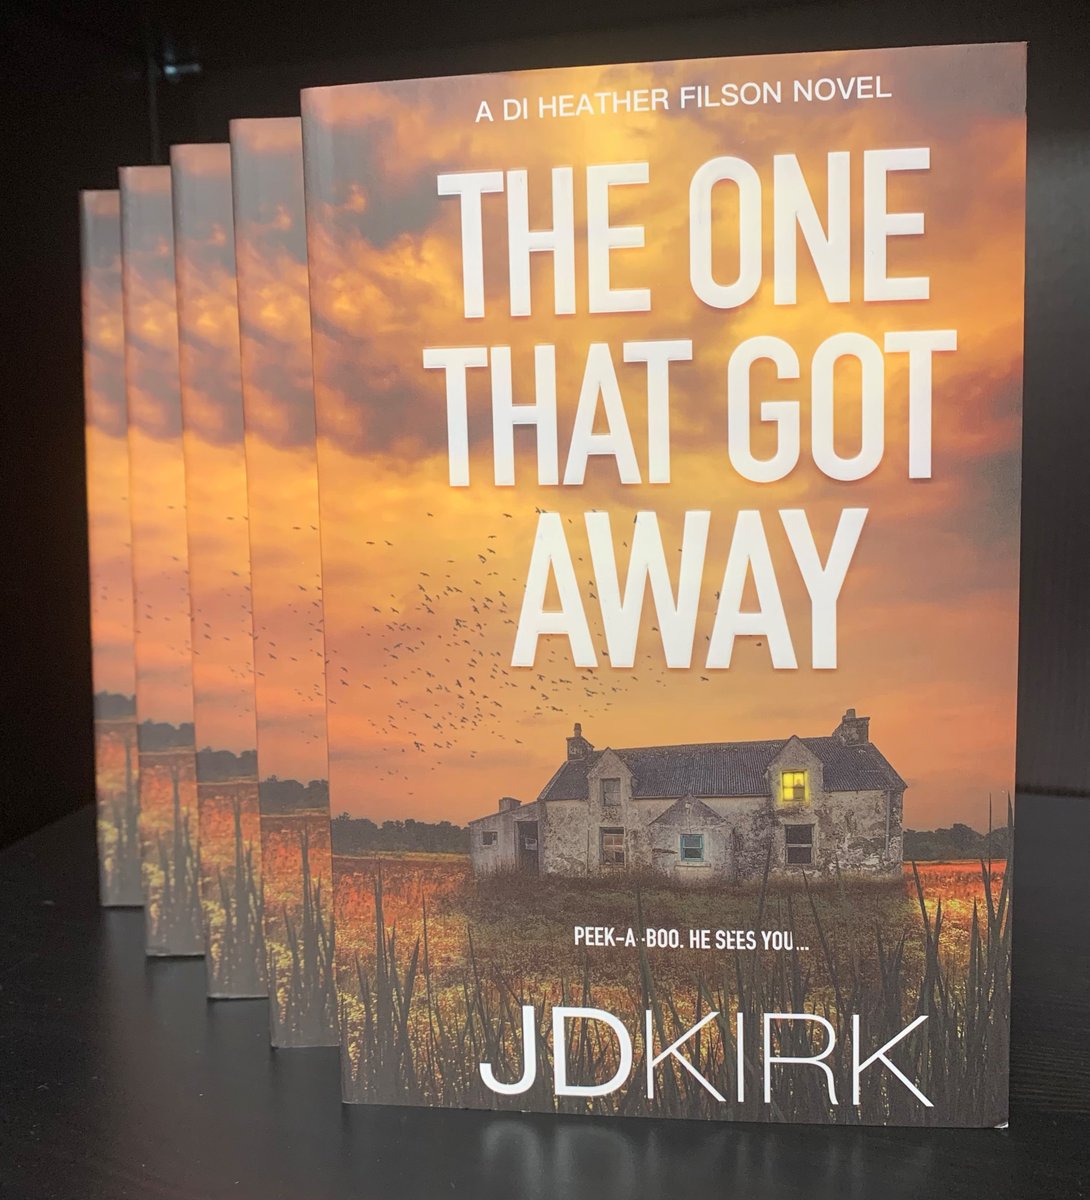 RT/follow for a chance to win 1 of 5 copies!

Uncover the secrets of The One That Got Away in the first book in a brand new Scottish crime fiction series by @JDKirkBooks, author of the multi-million-selling DCI Jack Logan novels.

Blog has the deets: bit.ly/3NktBDl